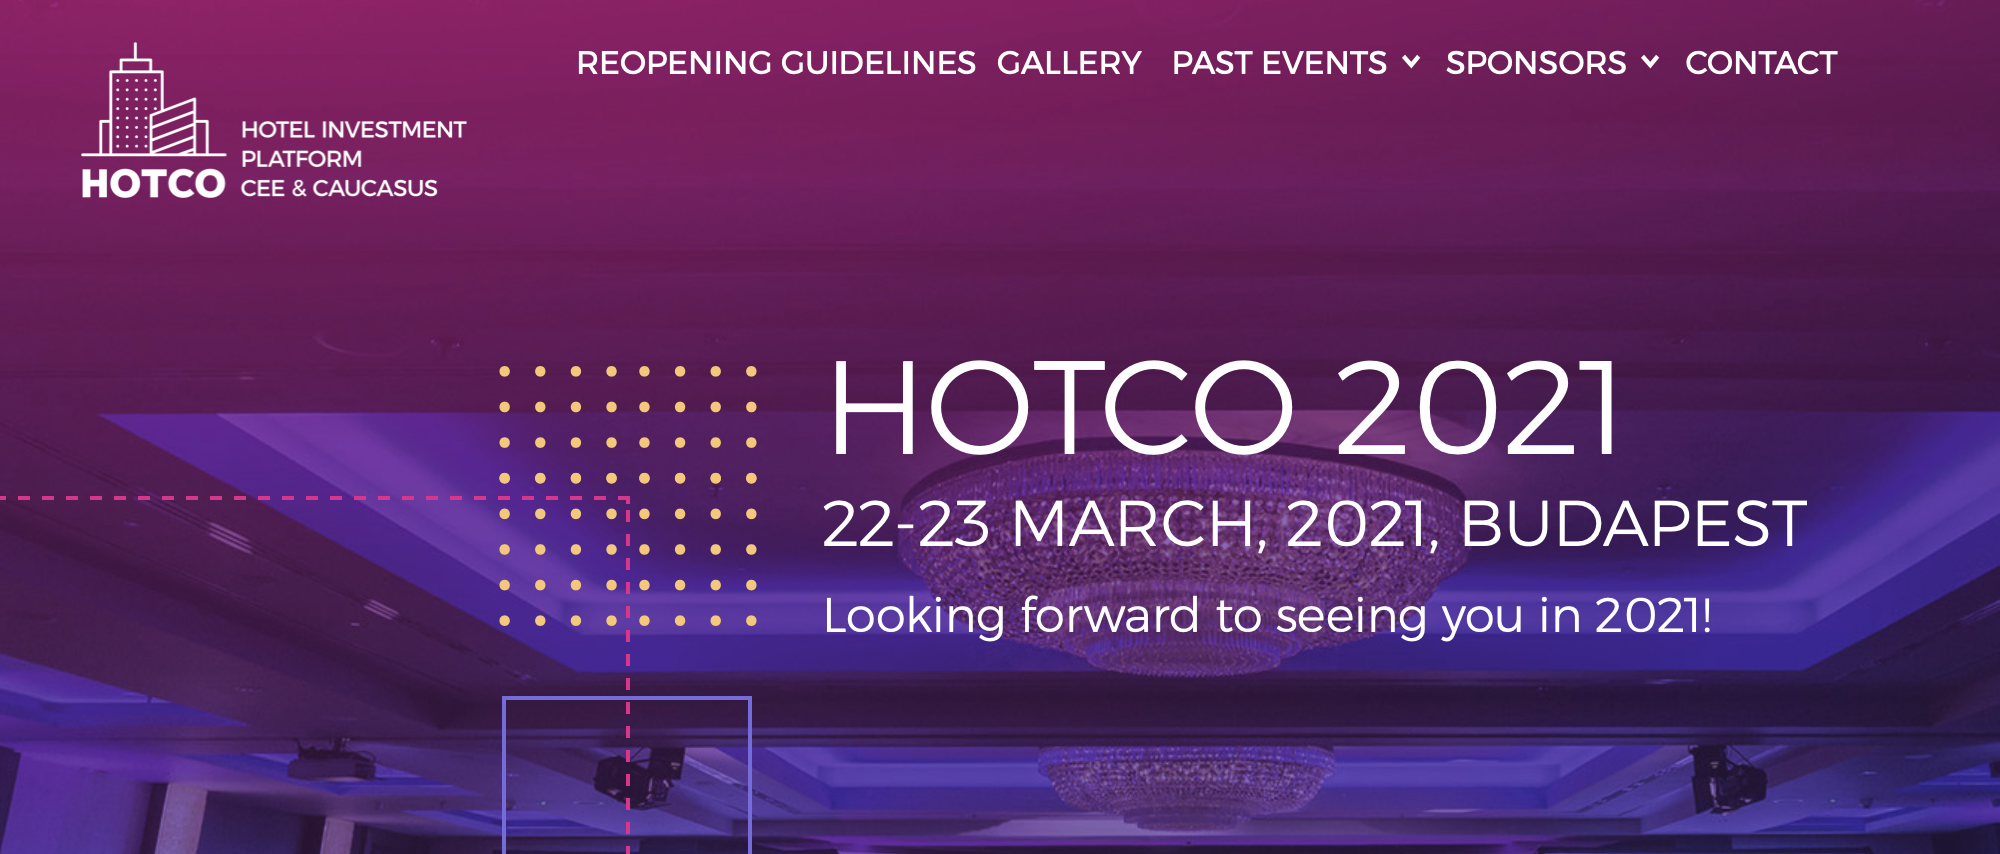 HOTCO announces dates for live meeting in 2021